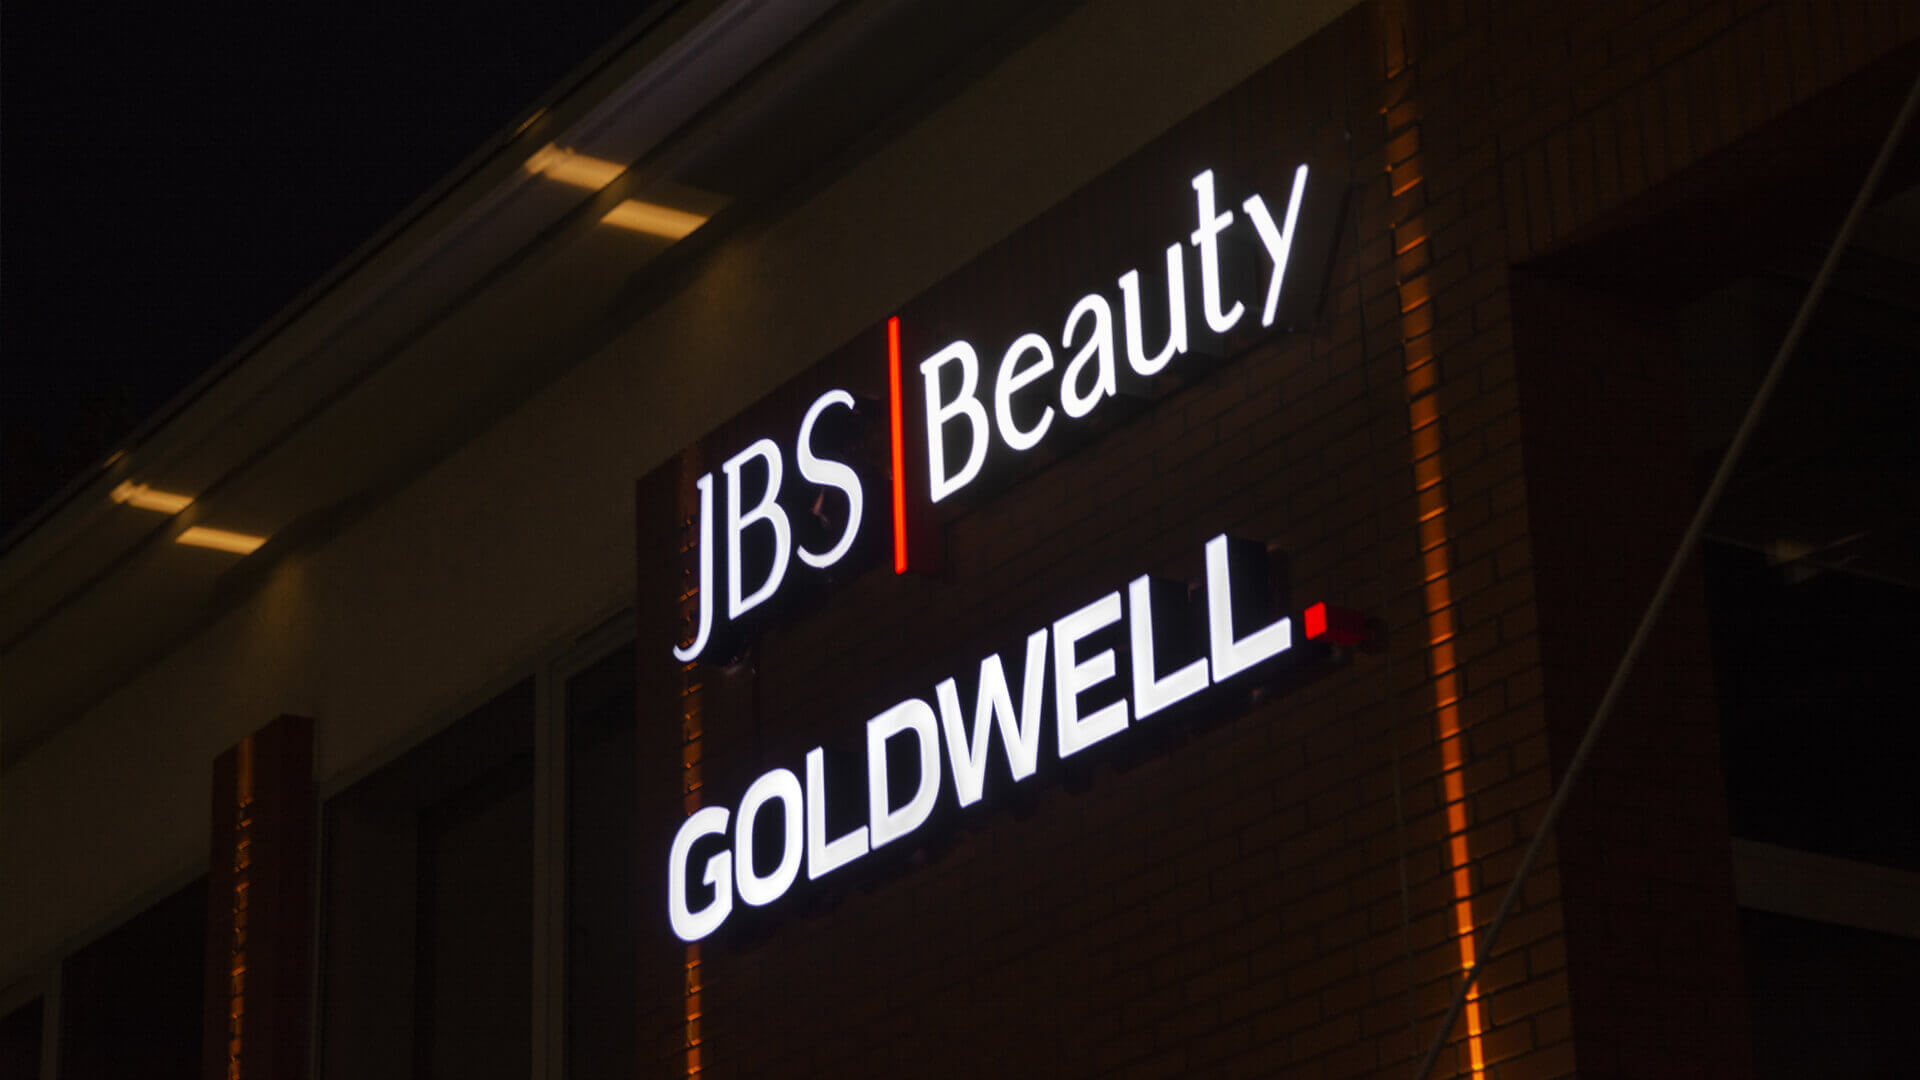 Goldwell goldwel - jbs-goldwell-bauty-letter-colour-illuminated-letter-signs-on-the-wall-of-the-building-letter-signs-on-the-height-of-the-beglach-letter-signs-on-the-office building-gdansk-letnica (11) 